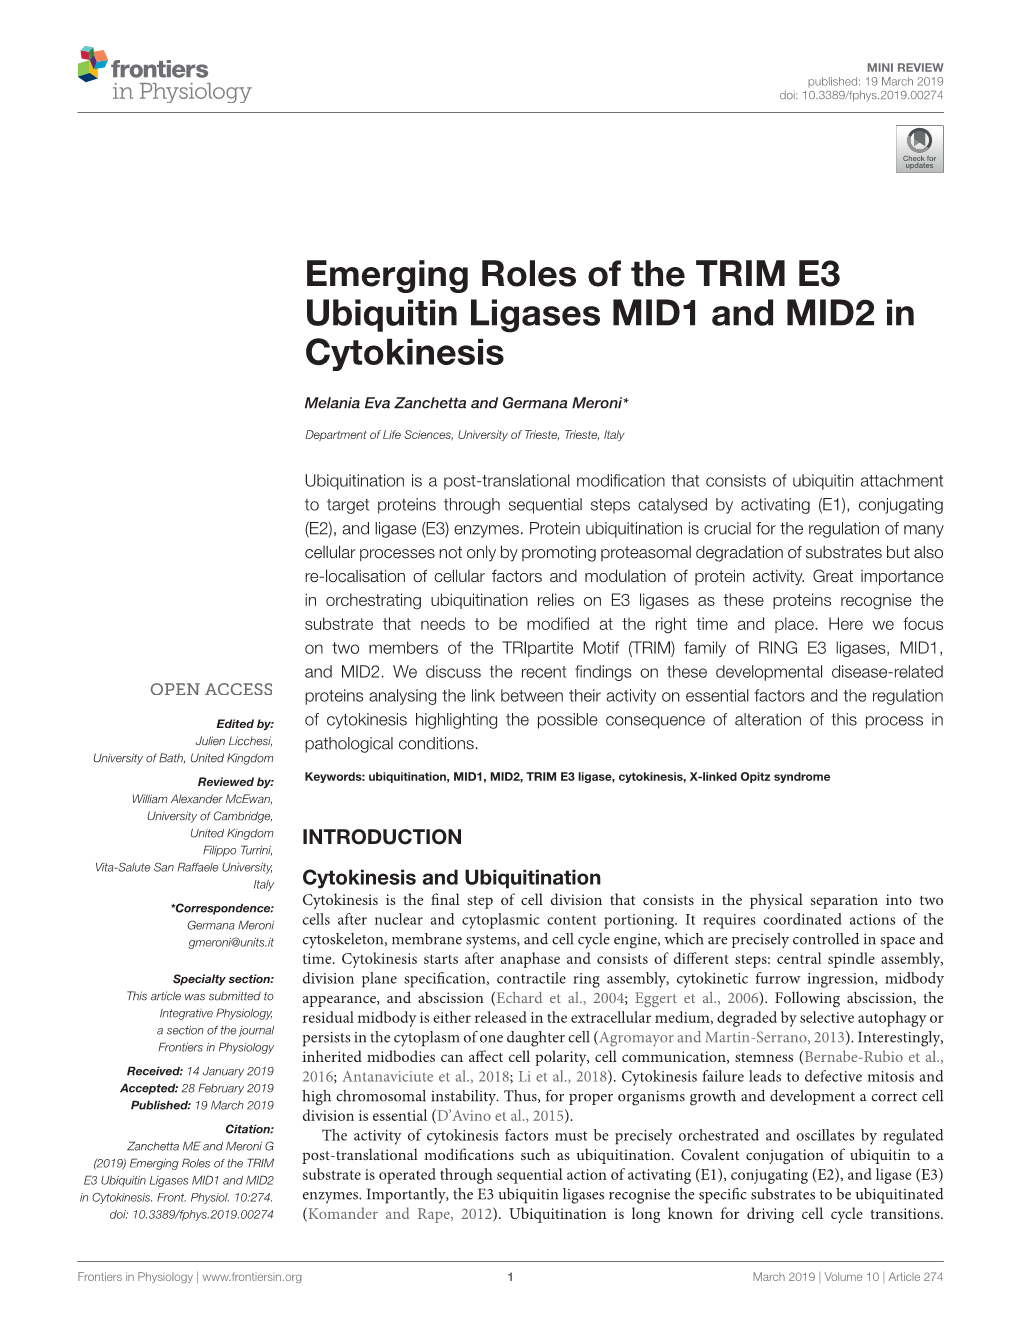 Emerging Roles of the TRIM E3 Ubiquitin Ligases MID1 and MID2 in Cytokinesis